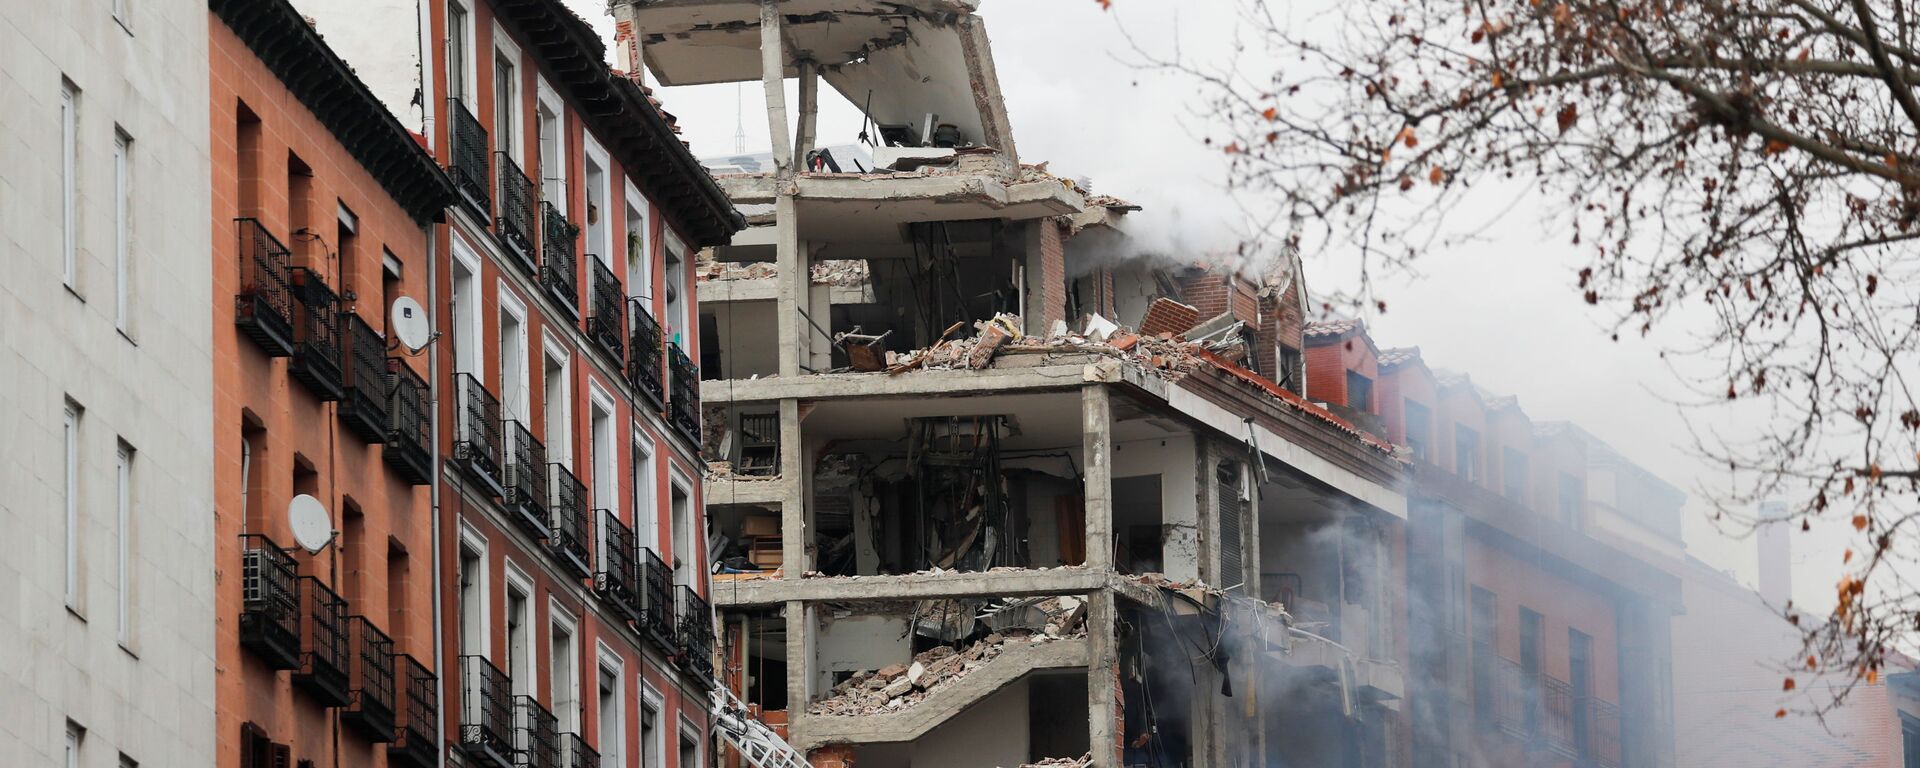 Smoke rises from a damaged building after an explosion in downtown Madrid, Spain, 20 January 2021. - Sputnik International, 1920, 20.01.2021